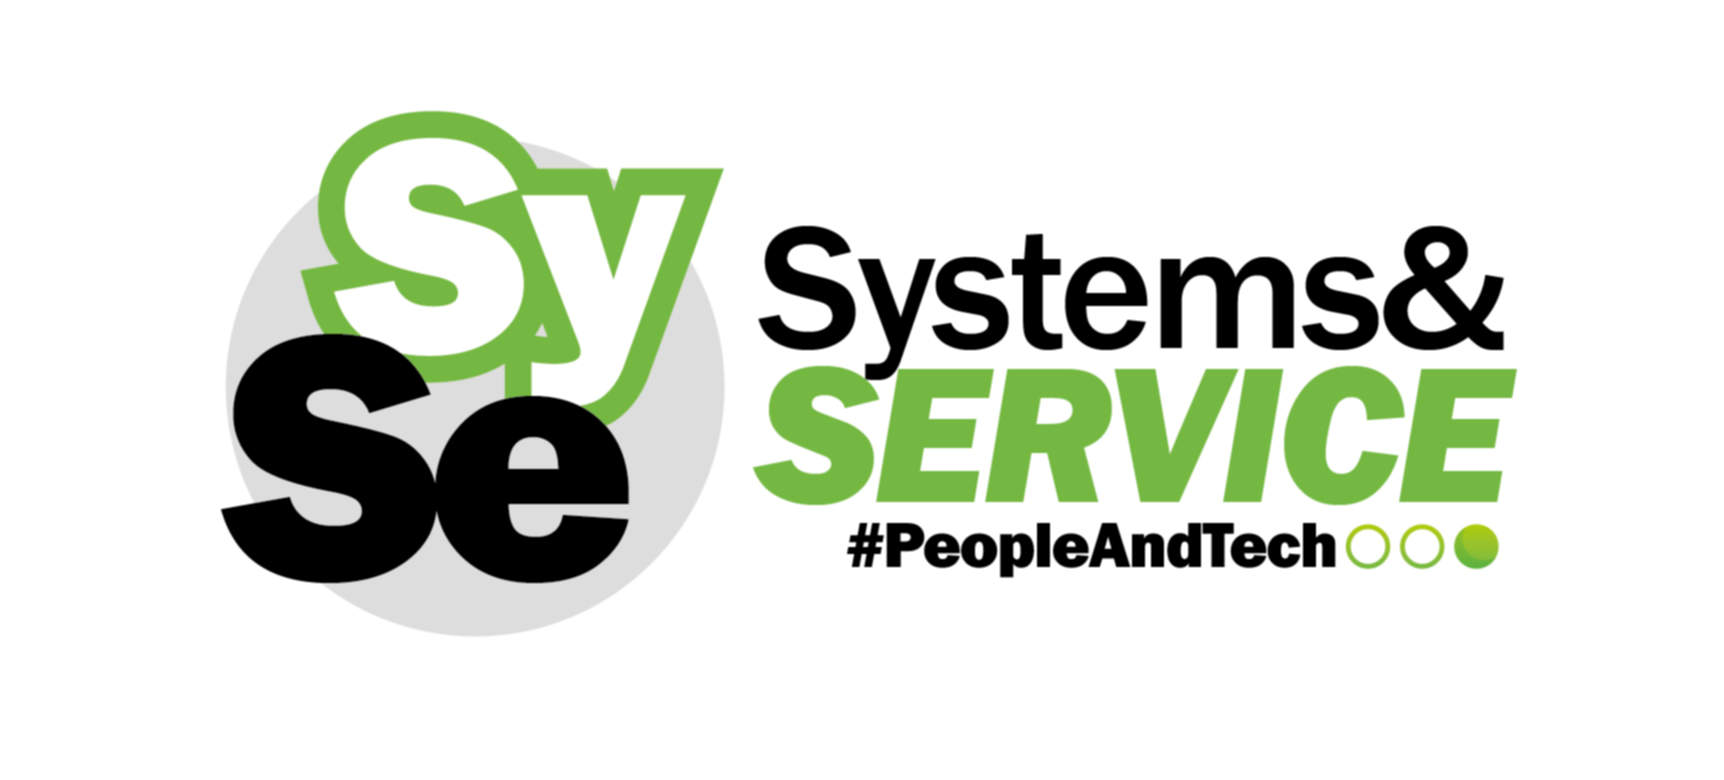 04-peopleandtech-Logo_SySe_completo